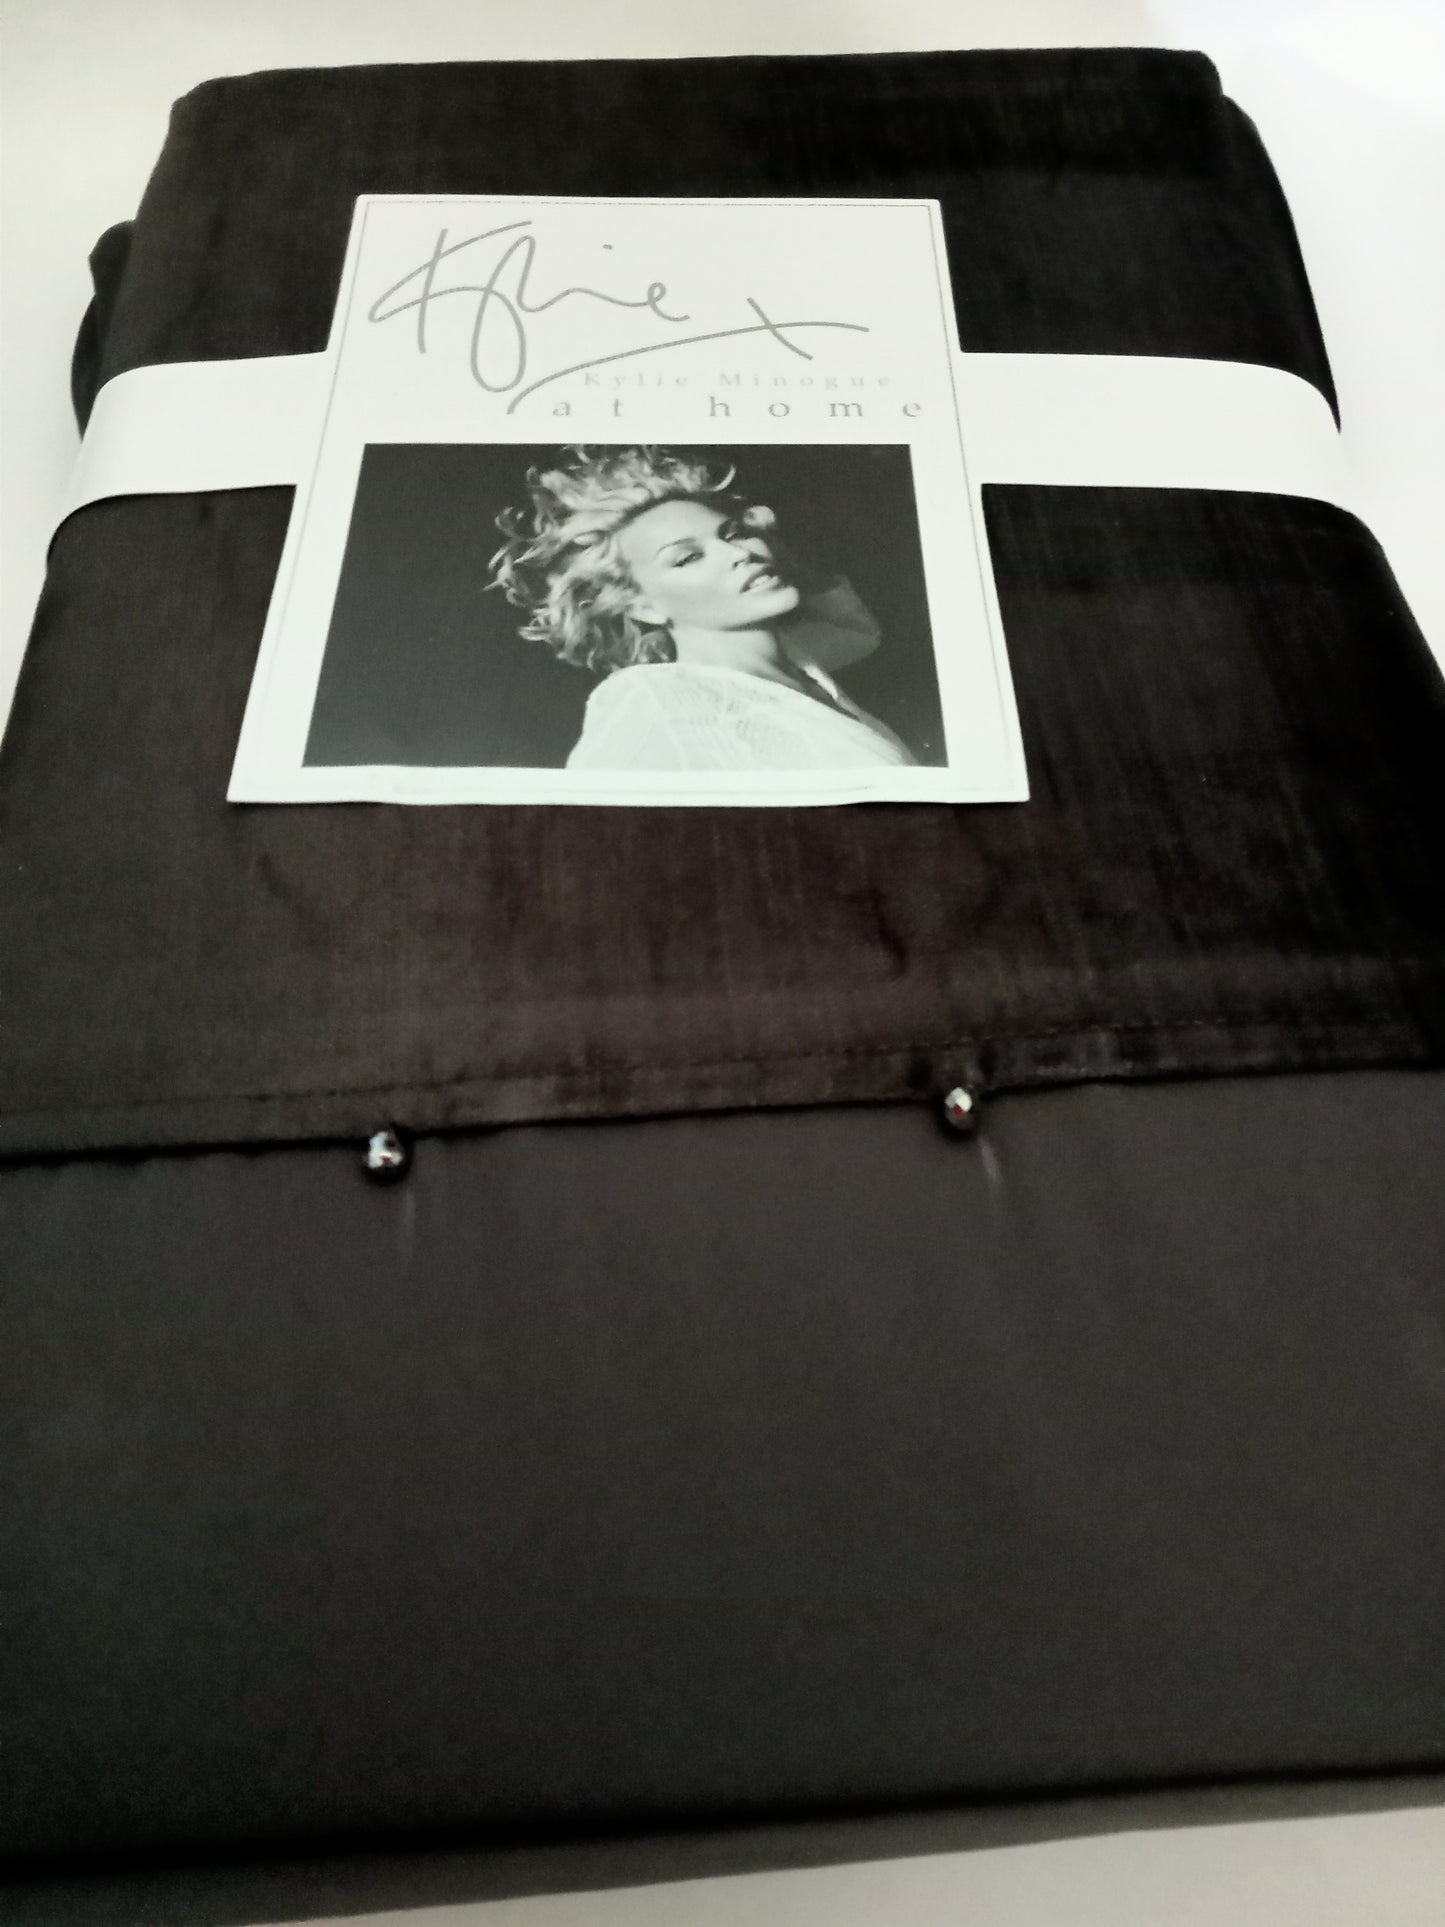 Adella Duvet Cover and Pillowcase/s Kylie Minogue at home